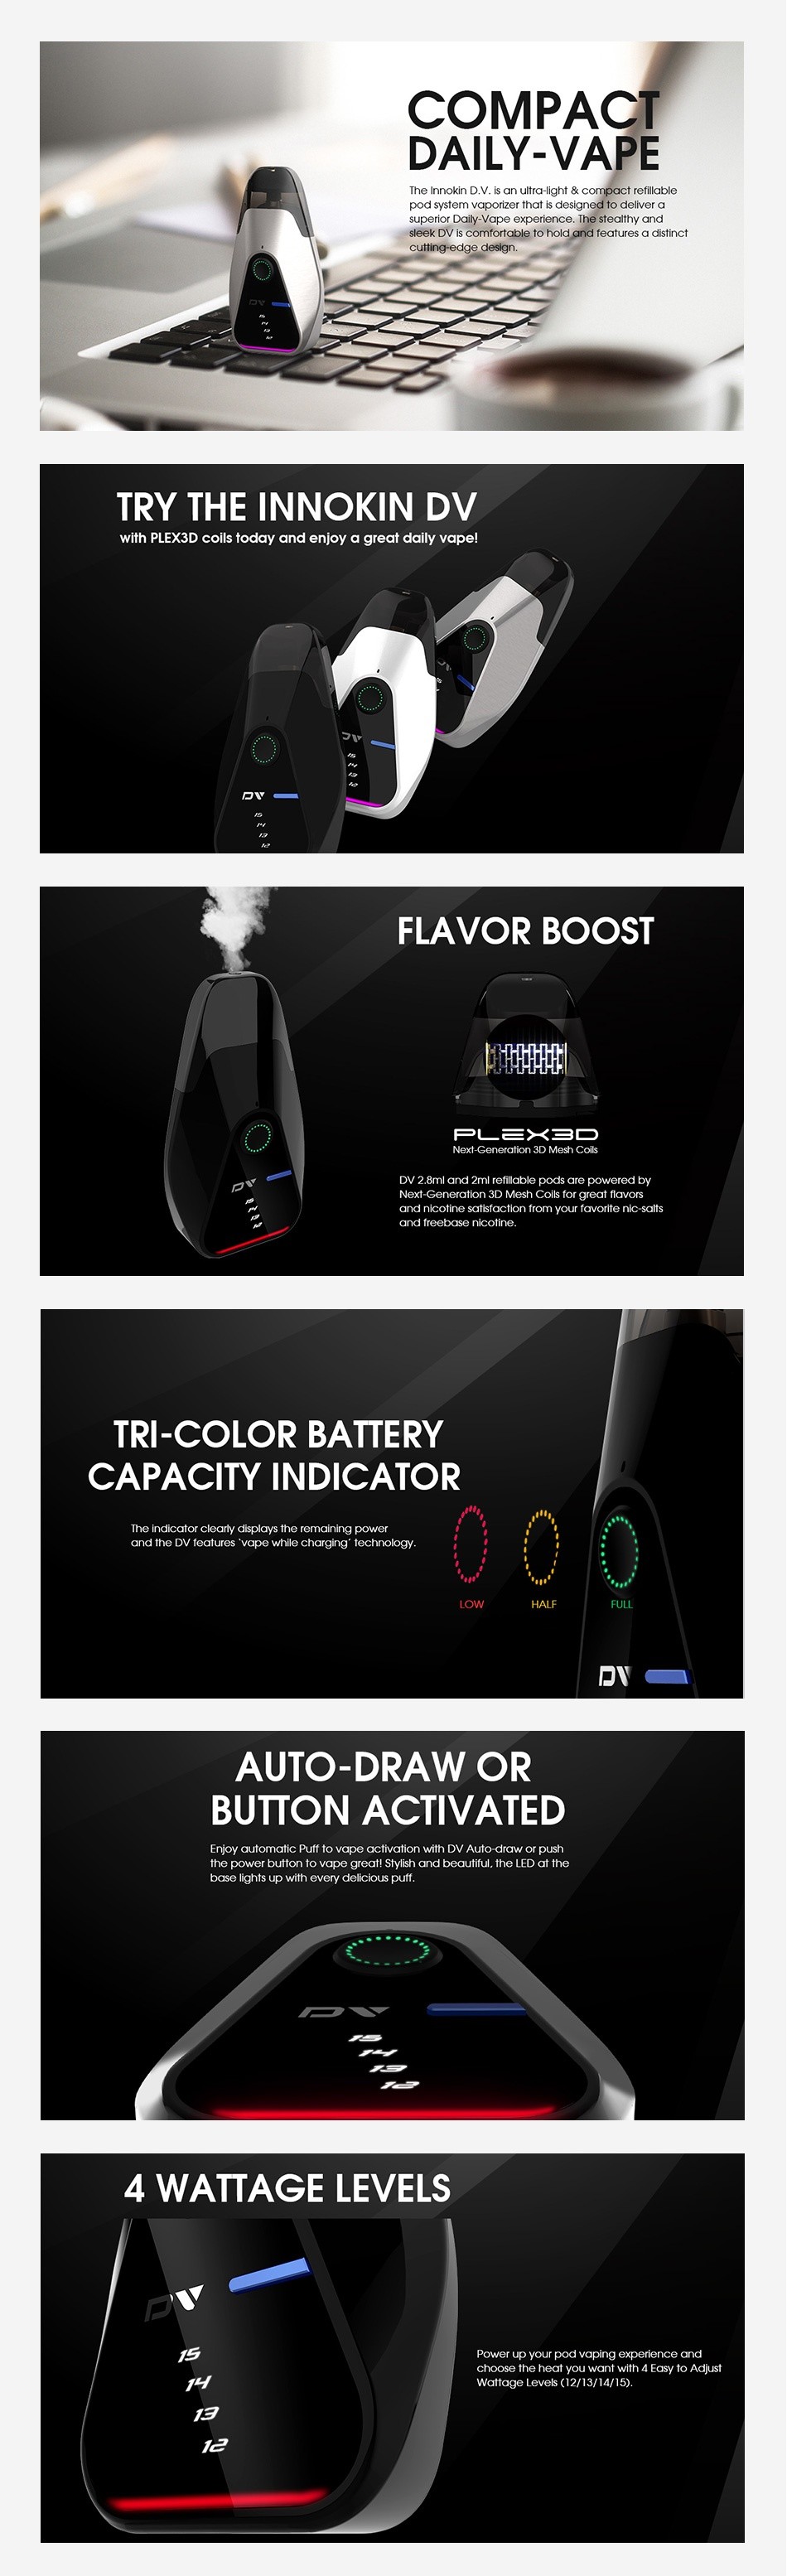 Innokin DV Pod Starter Kit 500mAh COMPAC DAILY VAP fortable to hold TRY THE INN K NDV with PLEX3D coils today and enjoy a great daily vape FLAVOR BOOST TRI COLOR BATTERY CAPACITY INDICATOR nd the Lv leaturas wape wh e charging tecnolgy HALF Y AUTO DRAW OR BUTTON ACTIVATED Power Button to vapa great  stylish ana beauti 4 WATTAGE LEVELS Fasy to Adjust arnage Leve 12 13 14 15